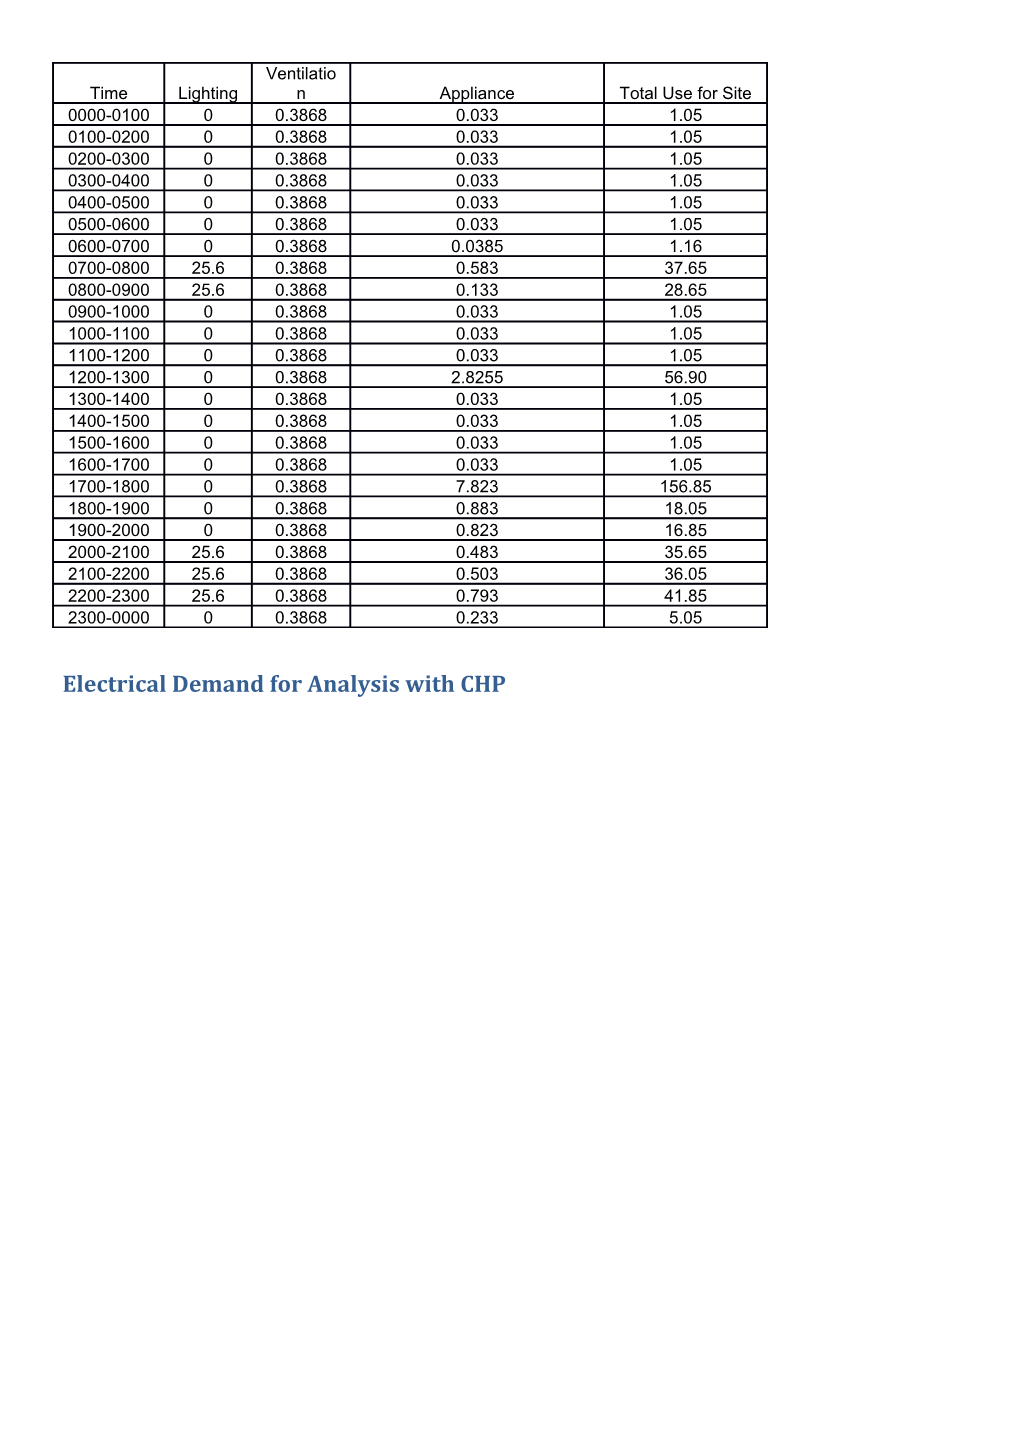 Electrical Demand for Analysis with CHP